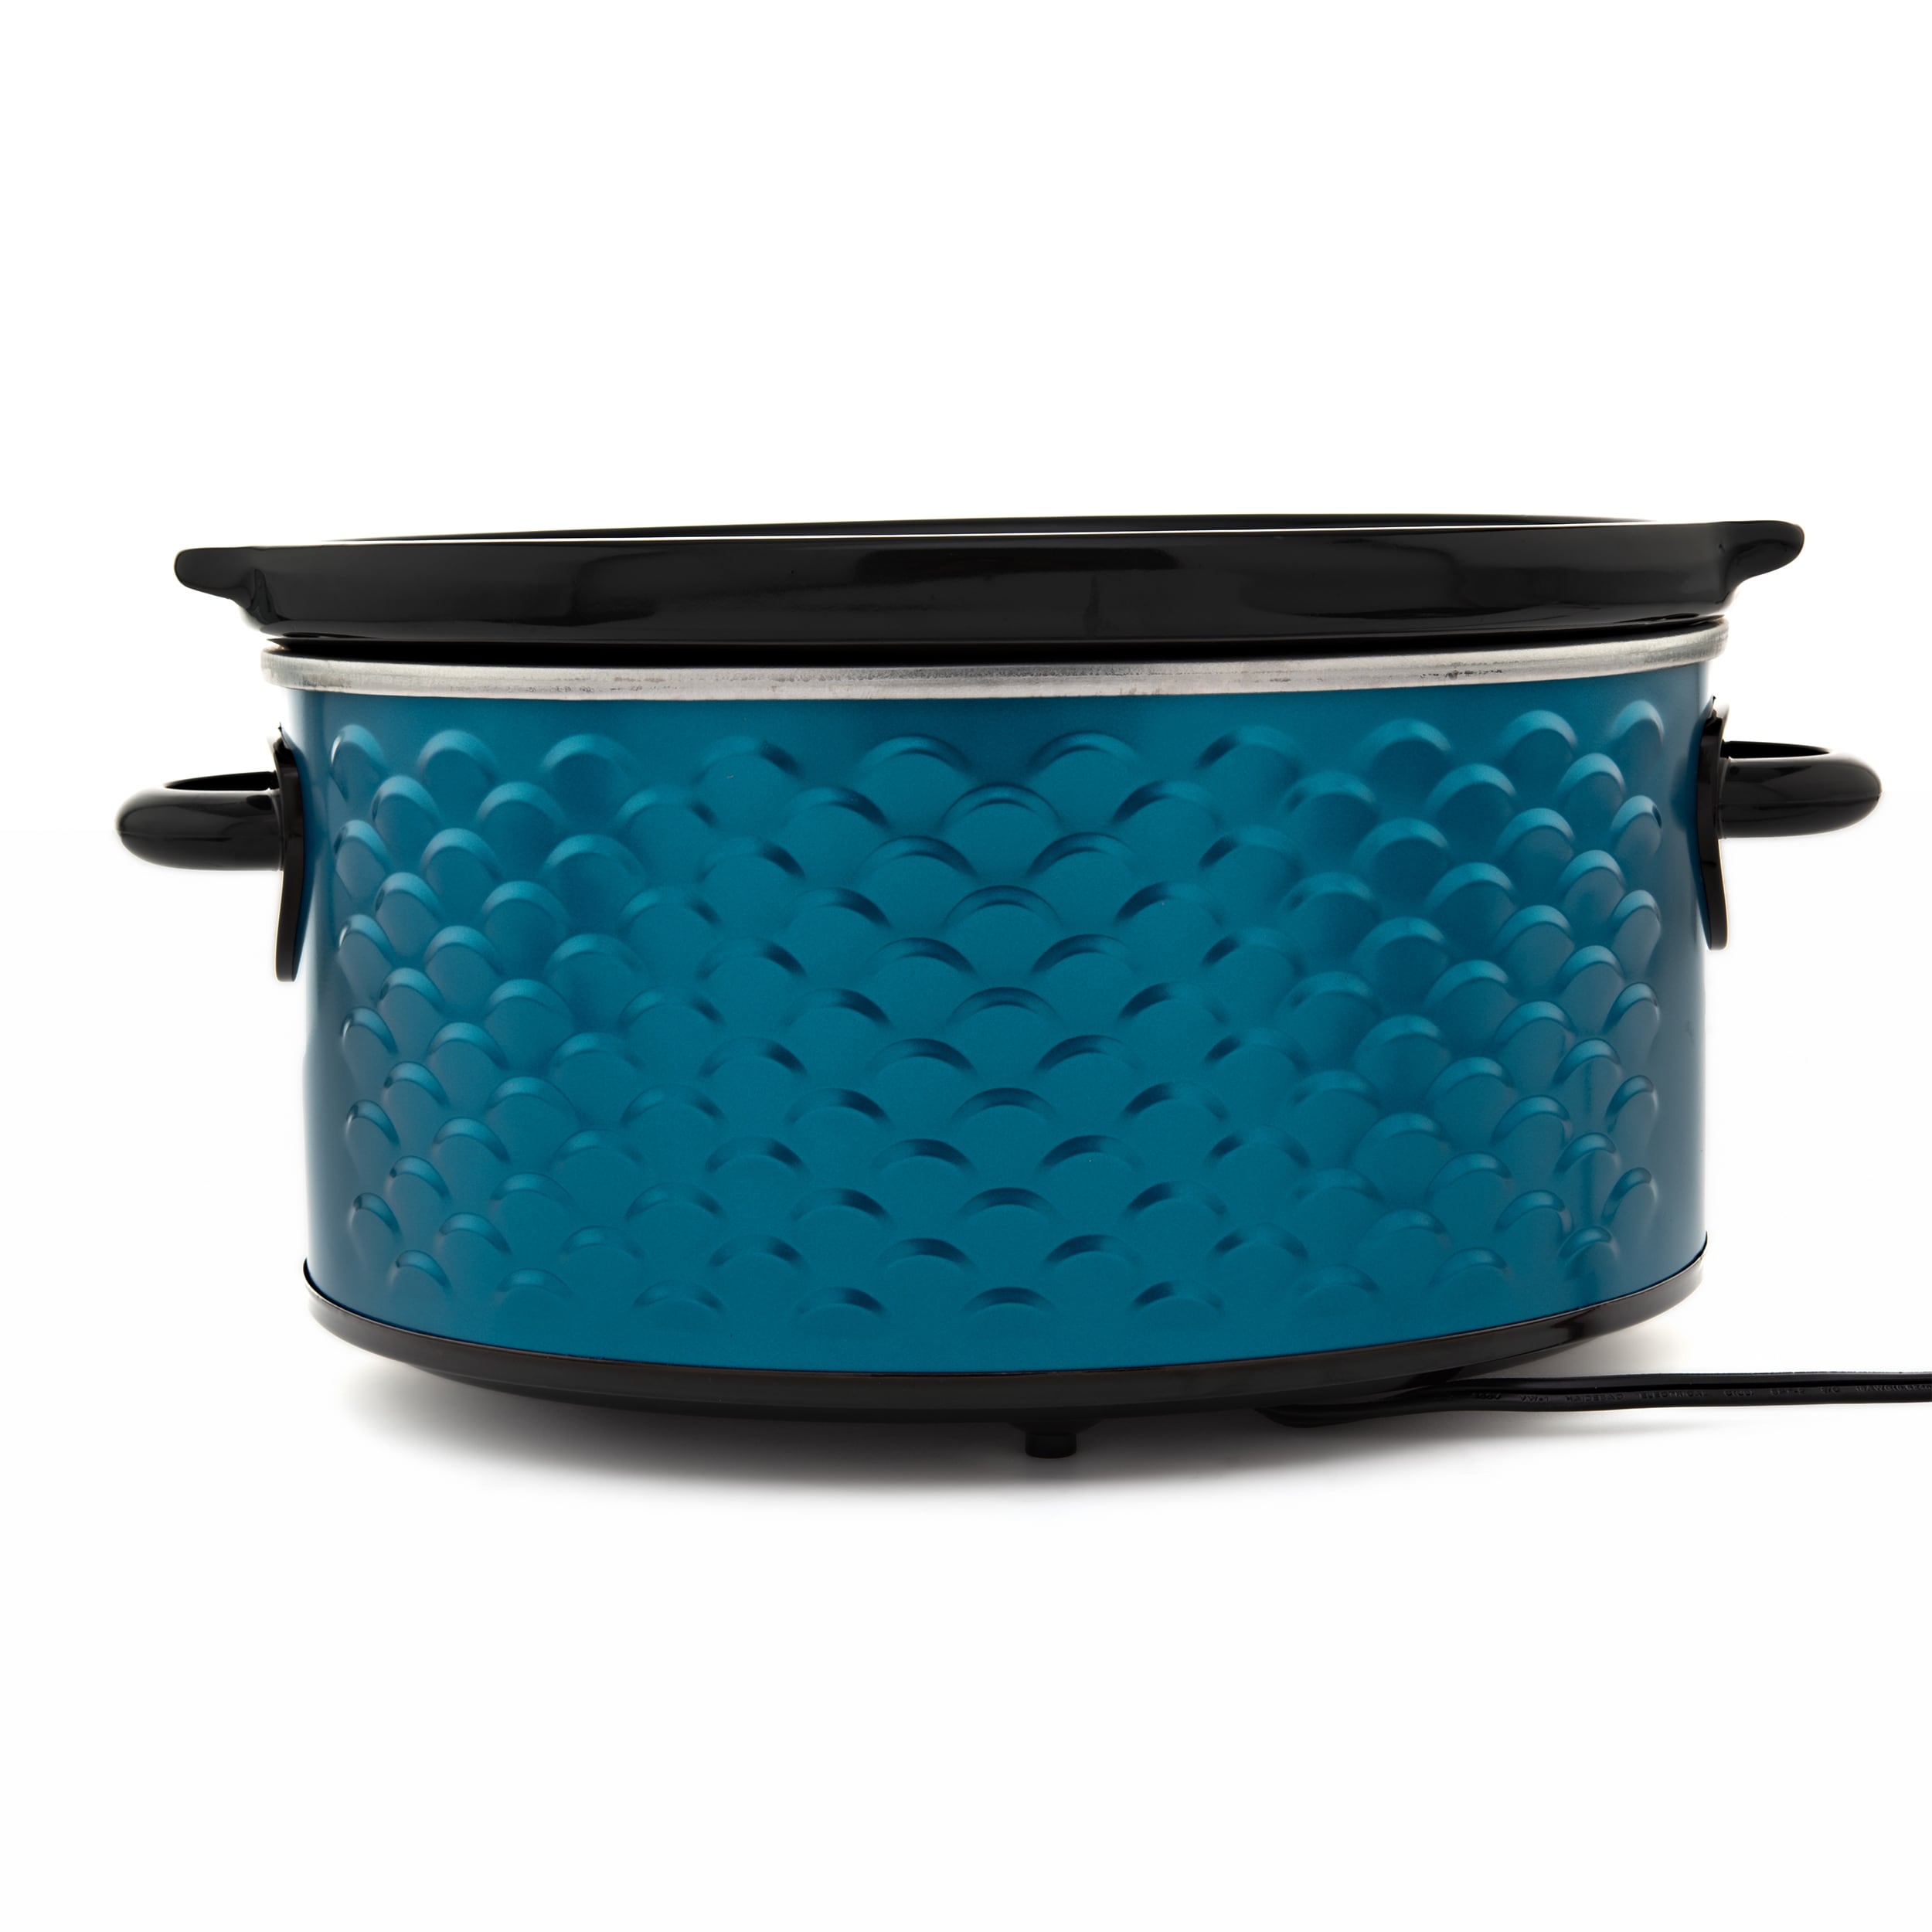 https://ak1.ostkcdn.com/images/products/is/images/direct/5b5970f0d81f9f5c18b83d21f84b28a7ce4d86df/Brentwood-Scallop-Pattern-4.5-Quart-Slow-Cooker-in-Blue.jpg